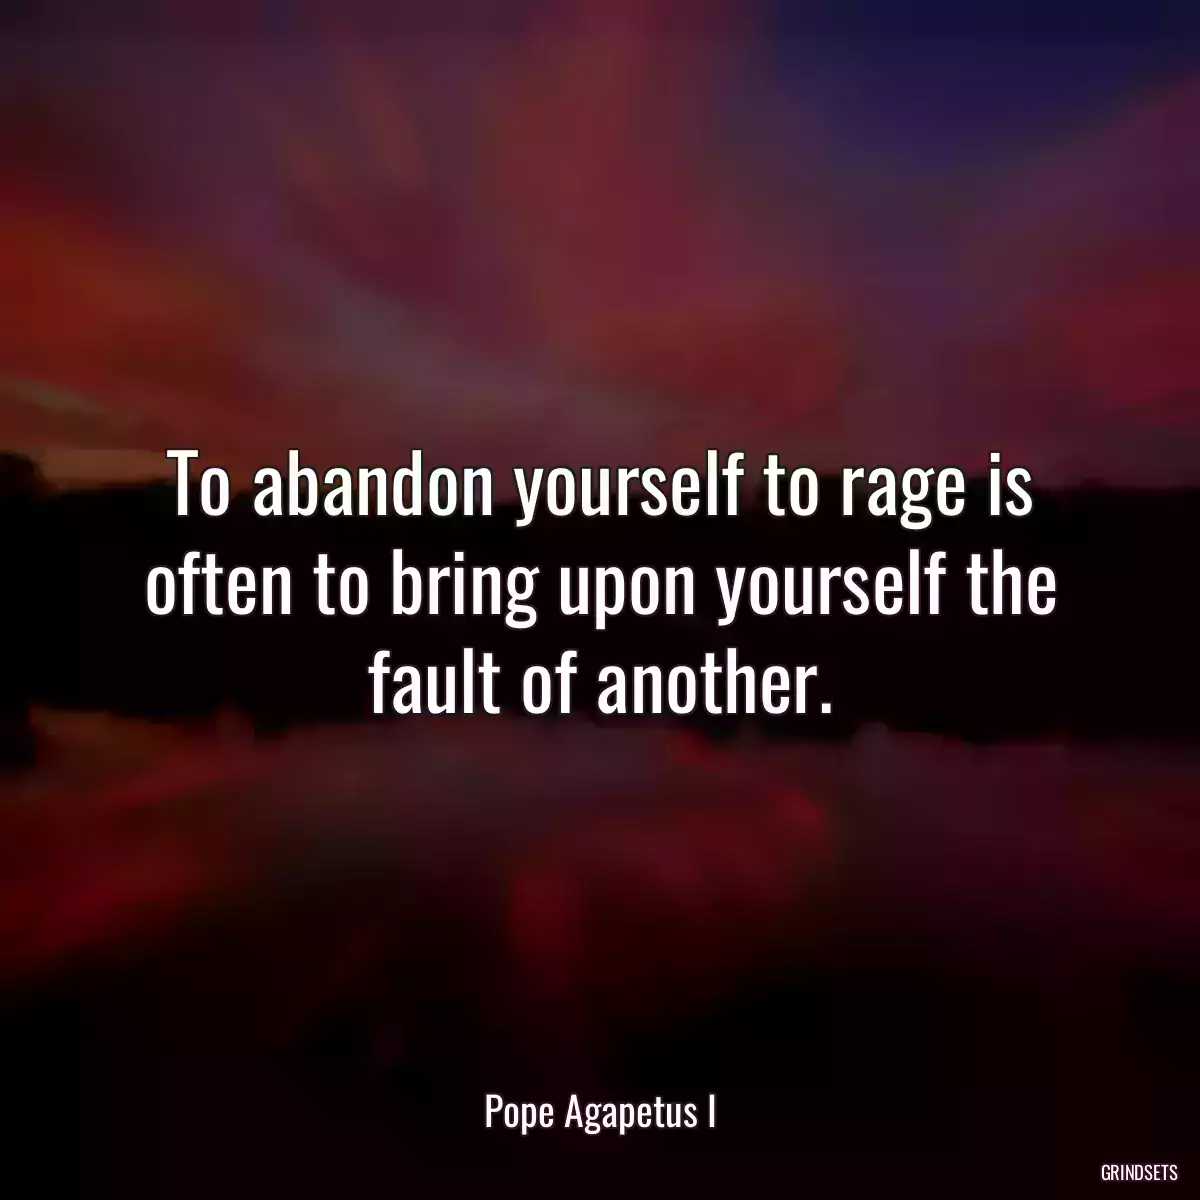 To abandon yourself to rage is often to bring upon yourself the fault of another.